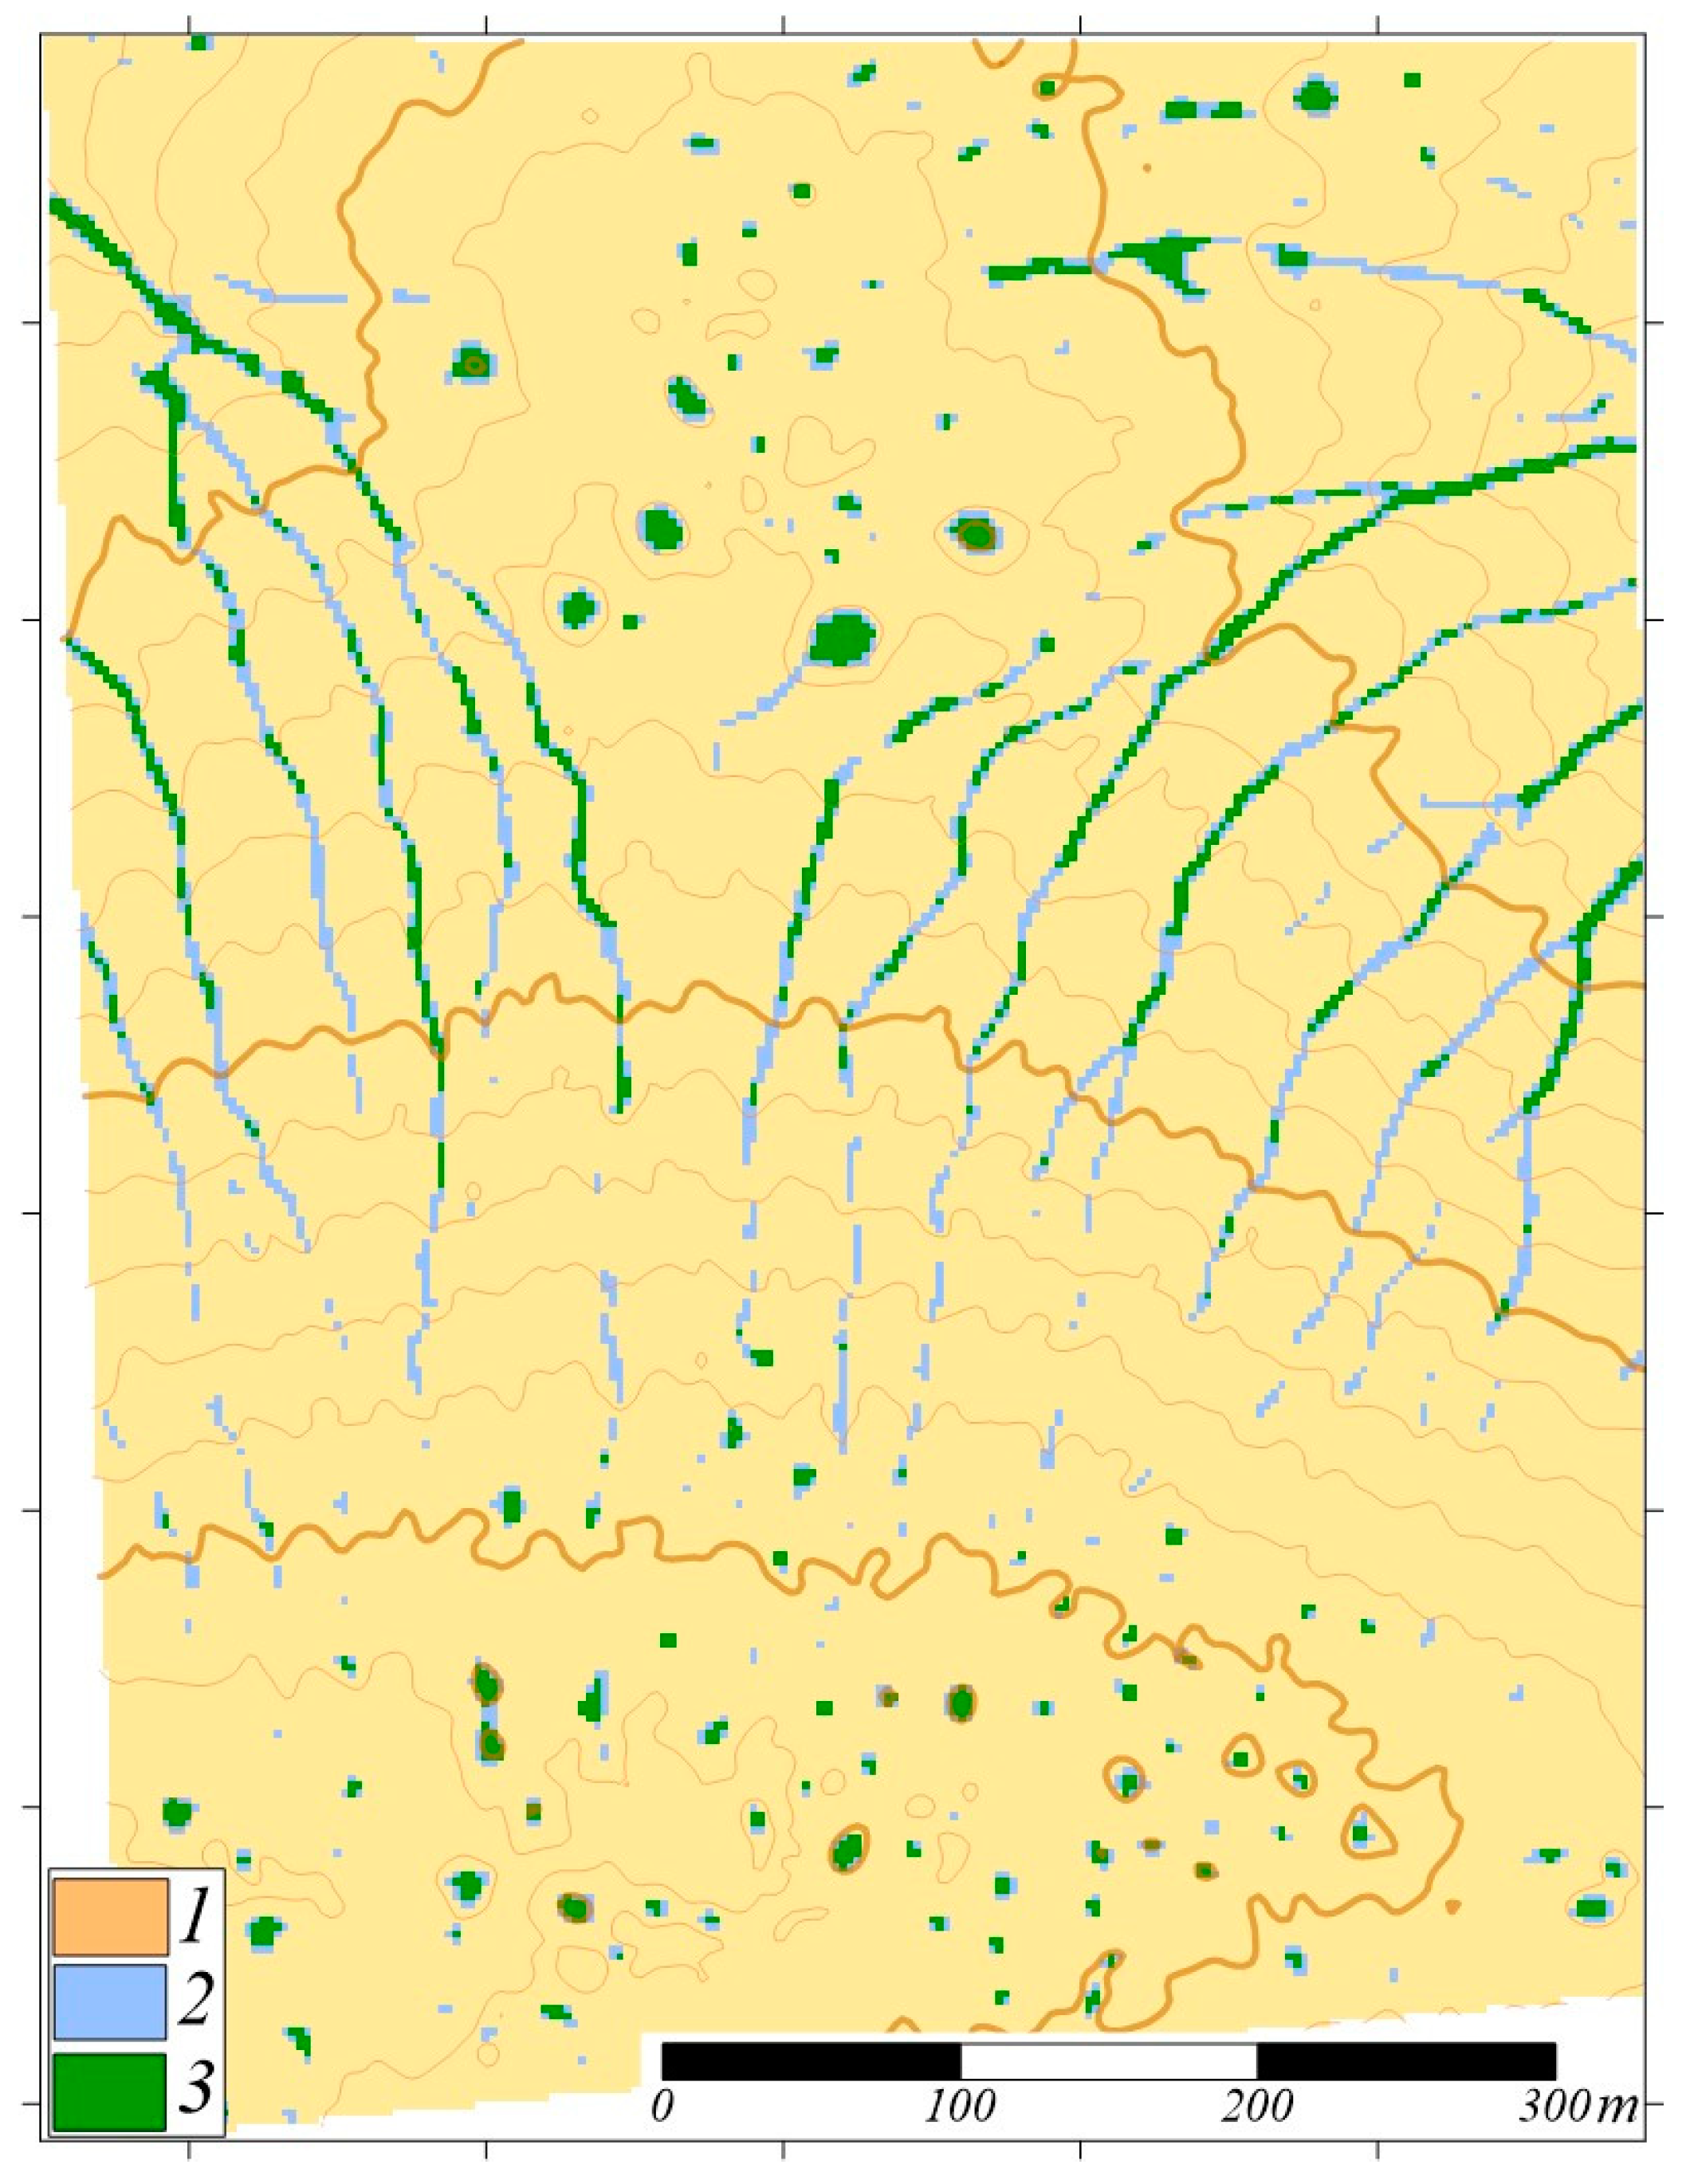 Soil Systems | Free Full-Text | Digital Mapping of Habitat for Plant  Communities Based on Soil Functions: A Case Study in the Virgin  Forest-Steppe of Russia | HTML